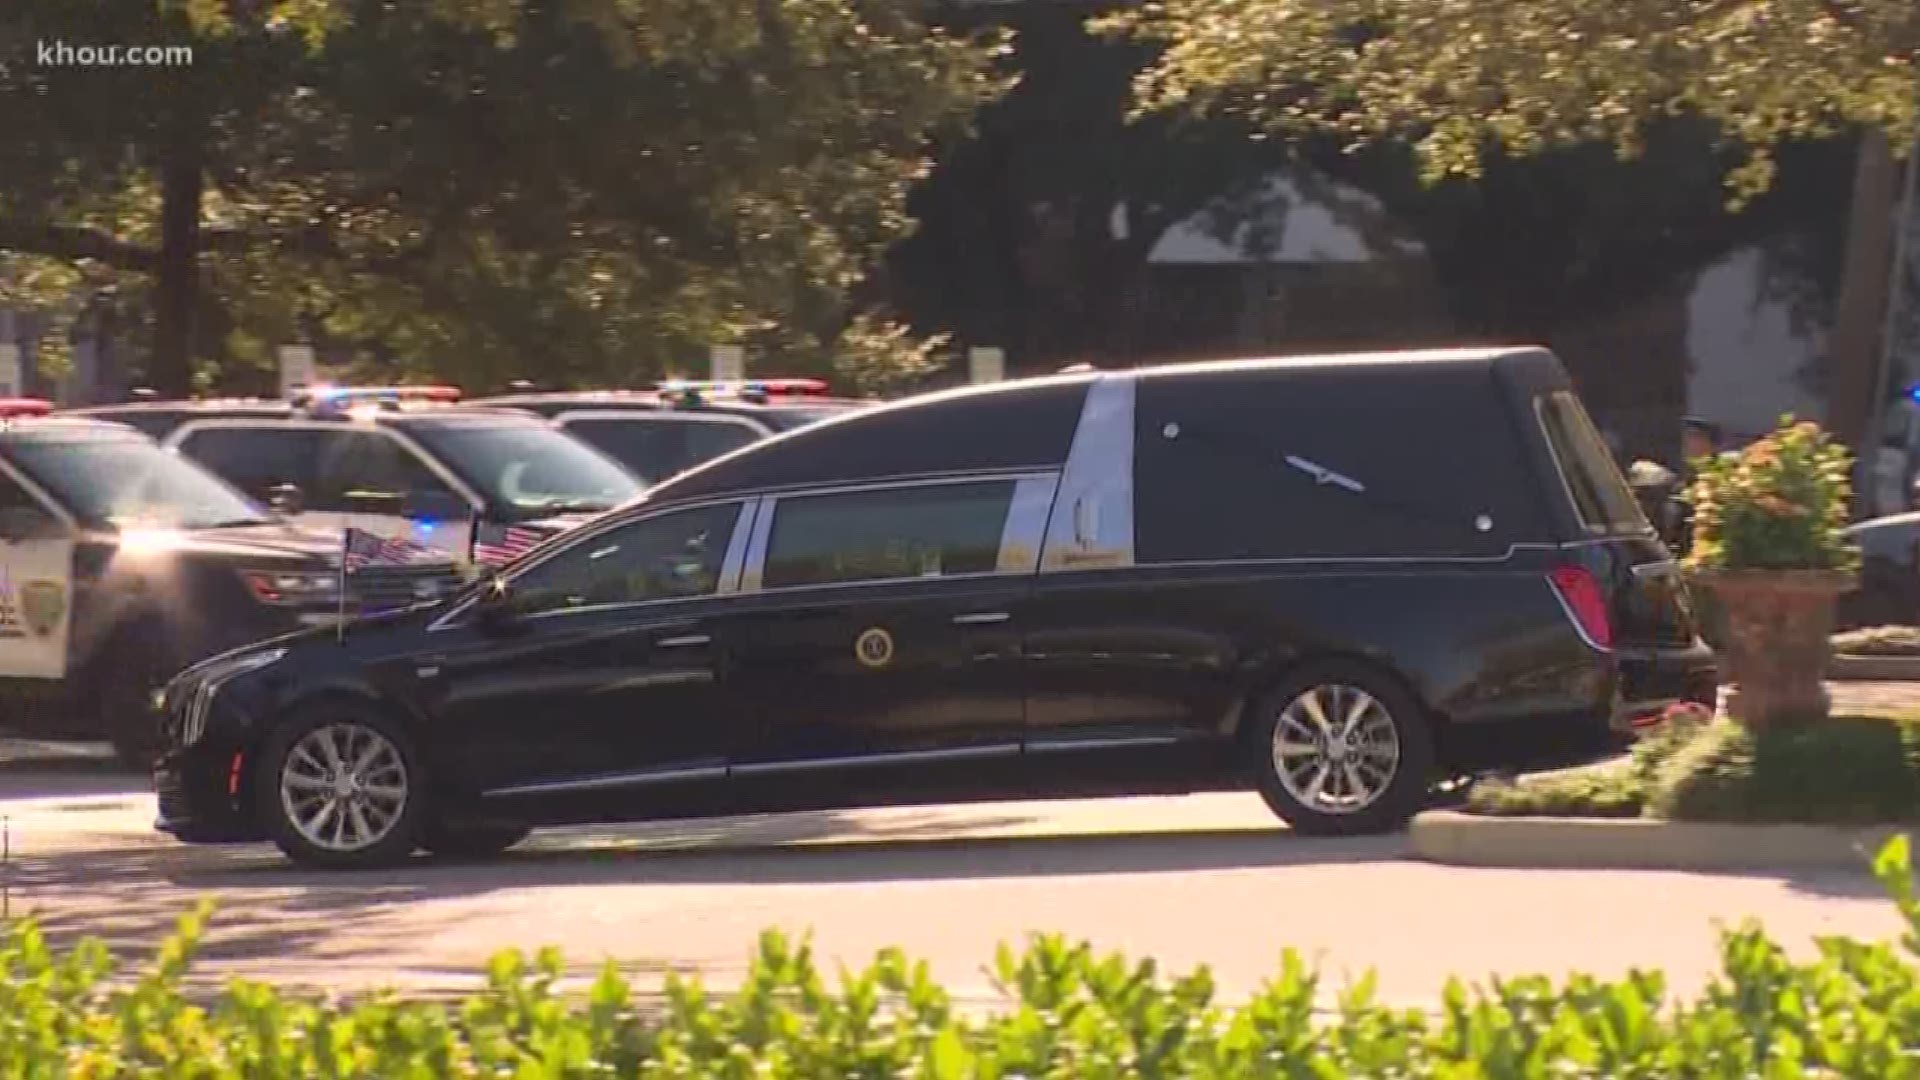 KHOU 11 reporter Michelle Choi is live from the funeral home where the remains of Former President George H.W. Bush were held for a service before his body was moved to Ellington Field and boarded onto a presidential plane bound for Washington D.C.